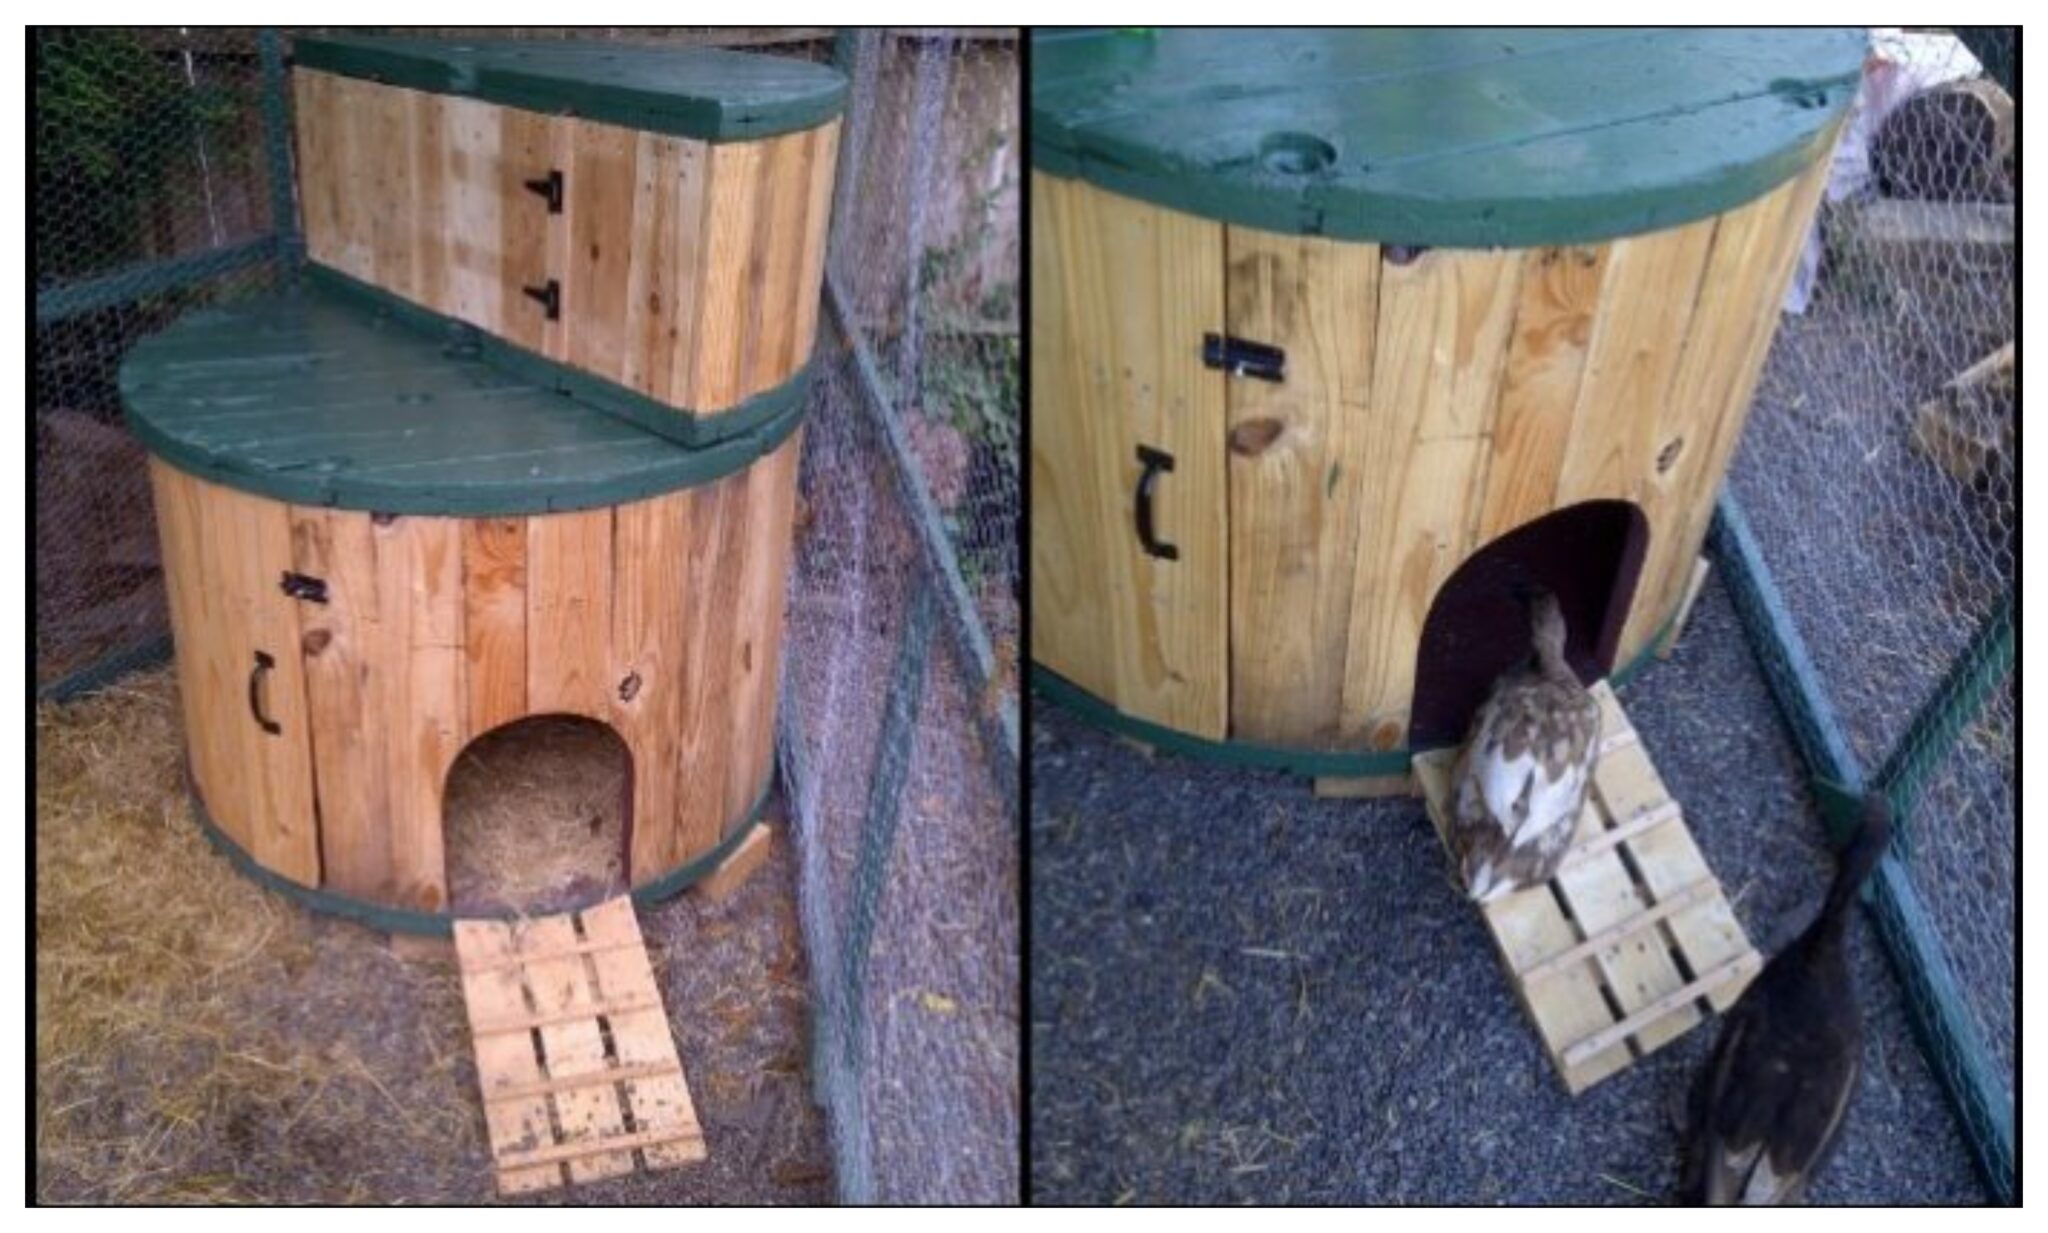 Inexpensive duck house from a wooden cable spool! - Your Projects@OBN